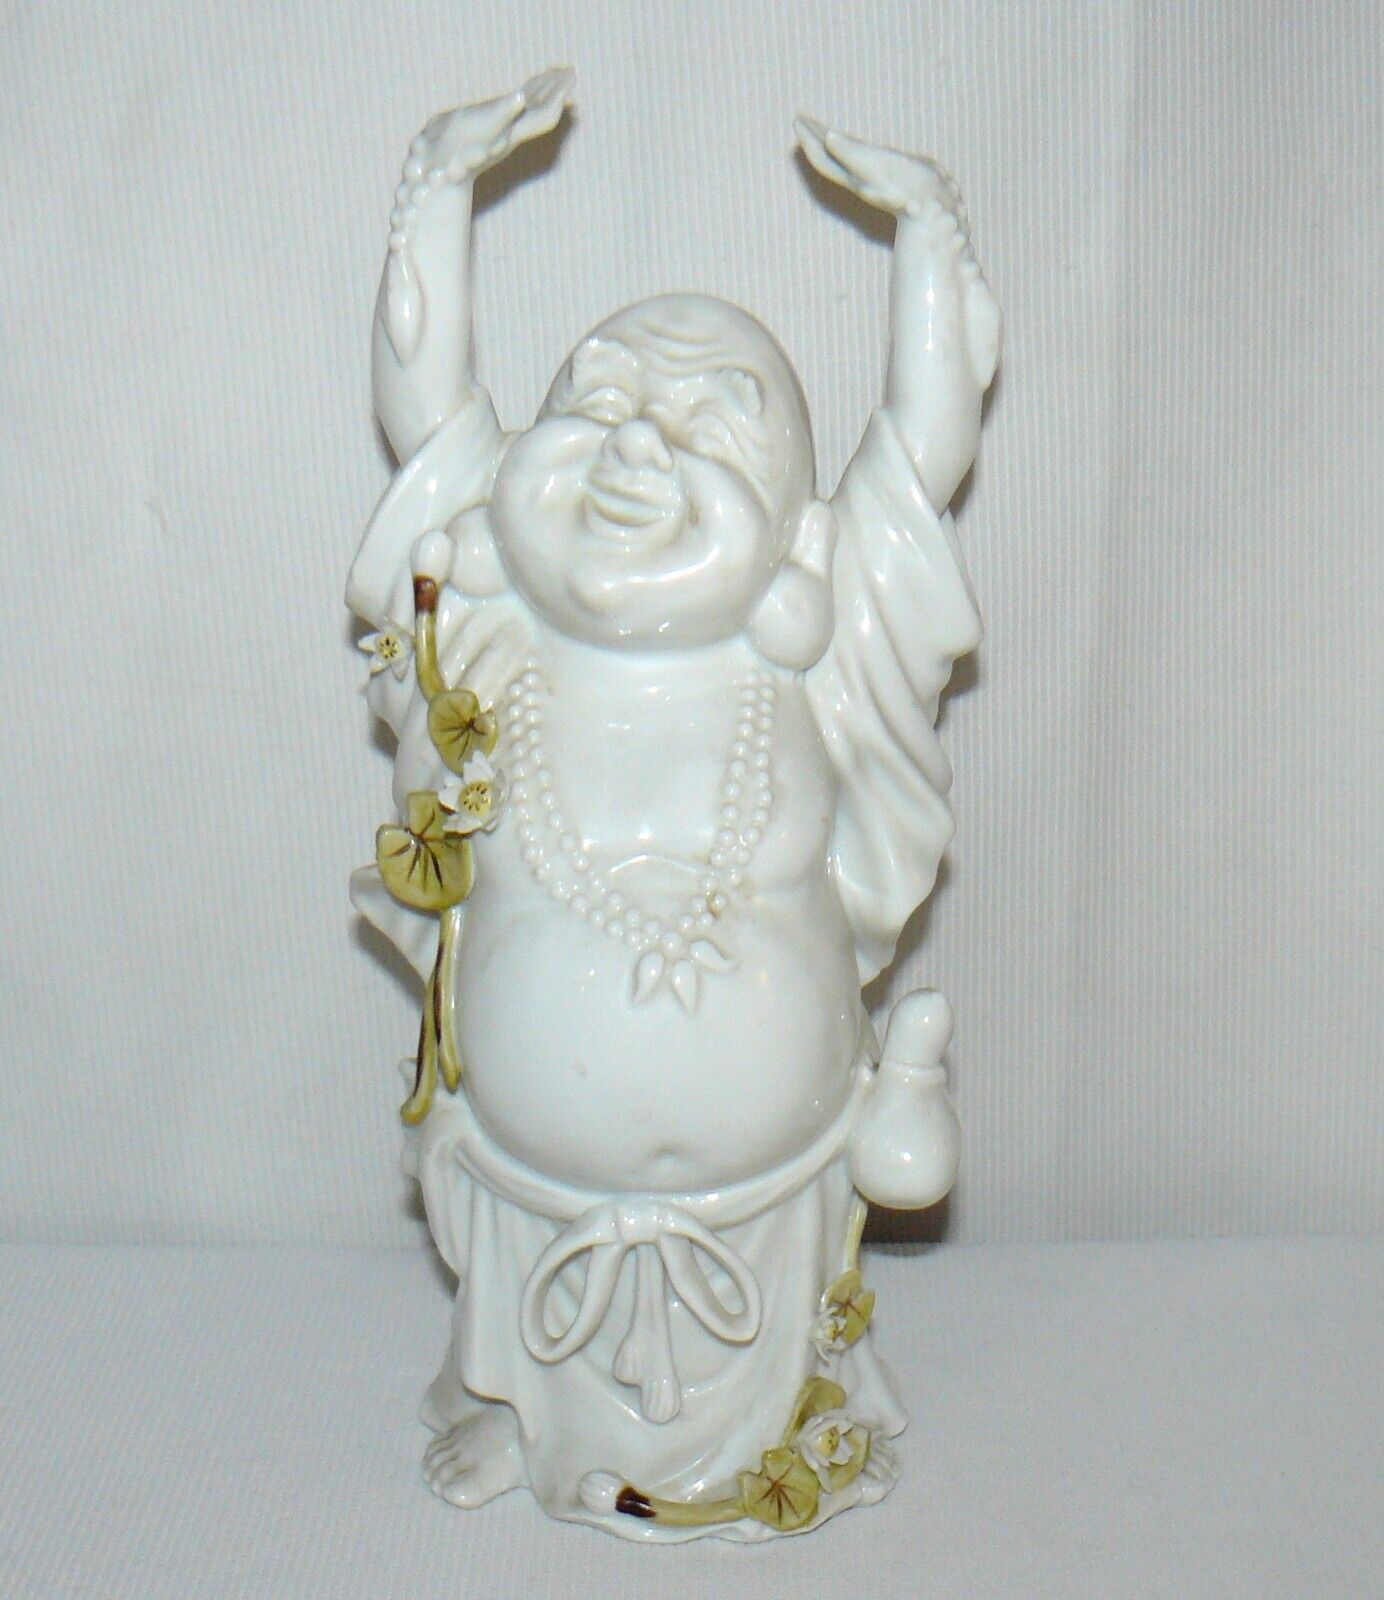 O/M/C Mexico Porcelain Highly Detailed Lord Buddha Messenger of God Zen Statue